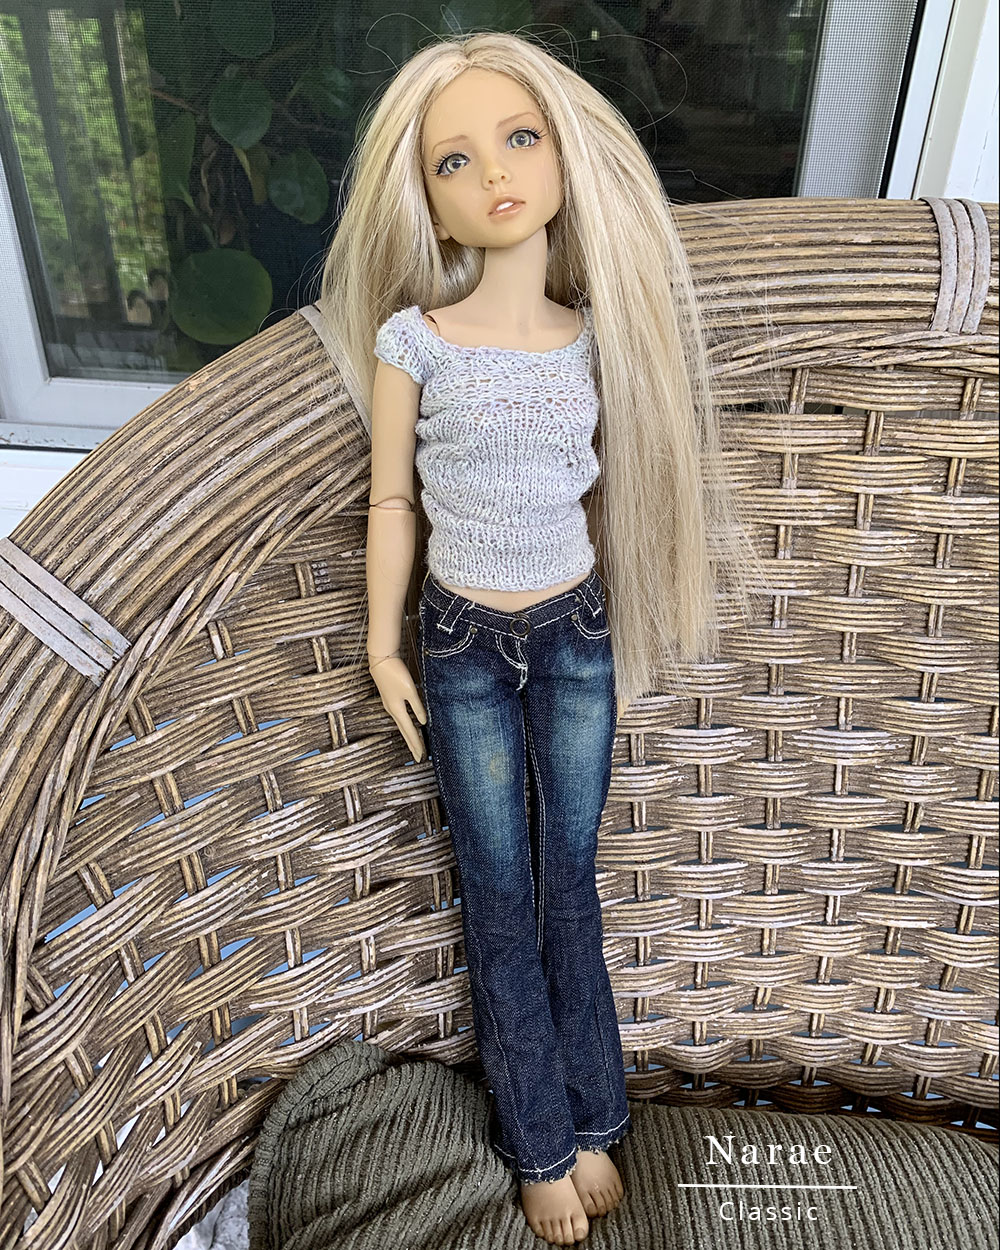 This Narae's doll clothes include a handmade sweater and jeans.